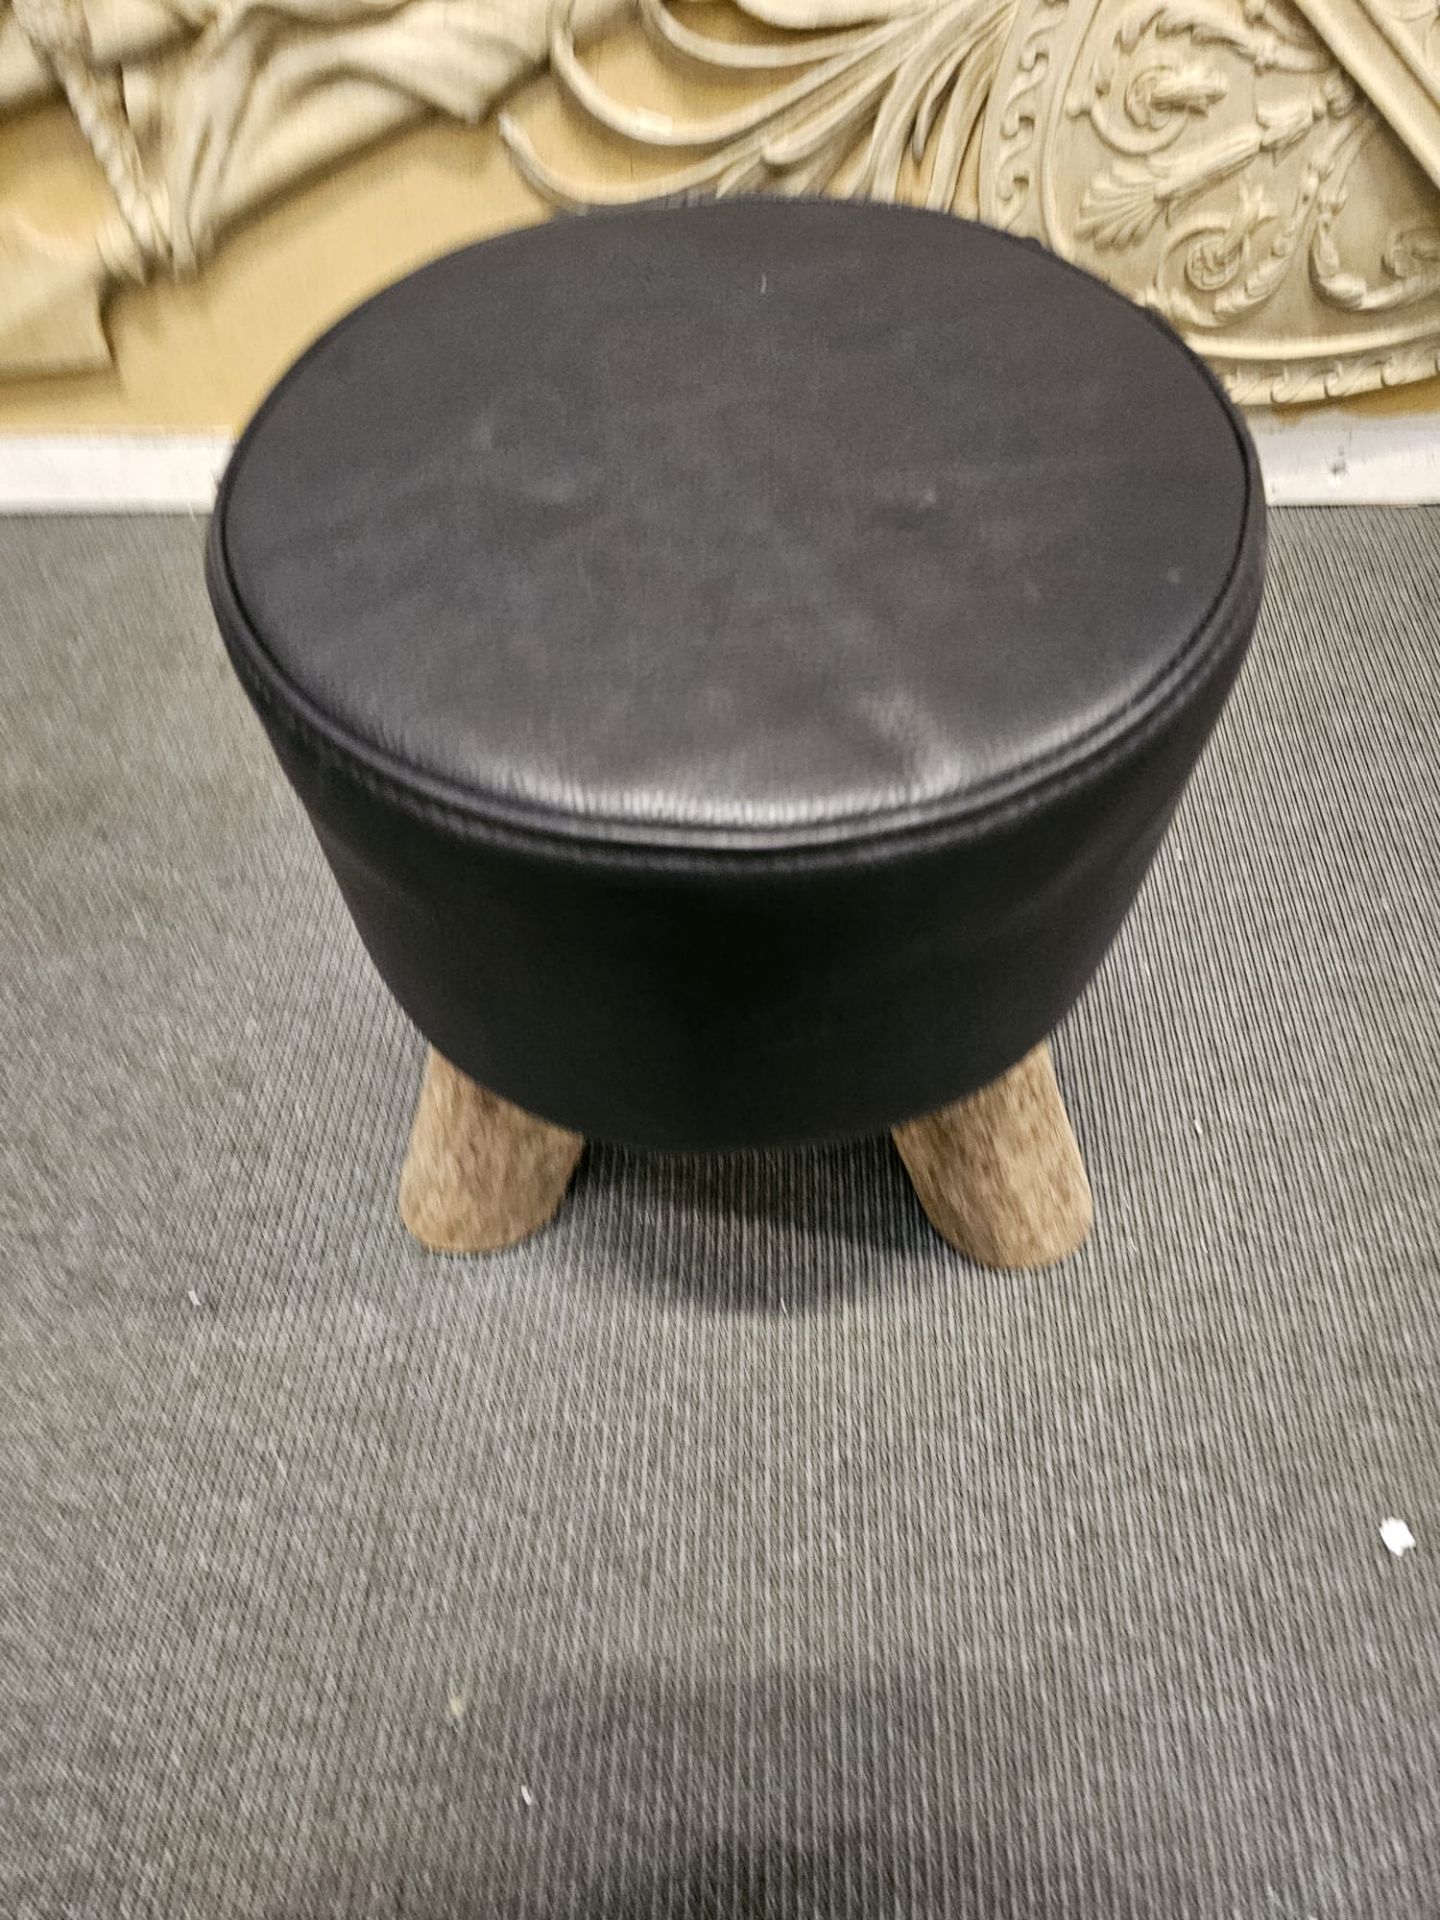 Bleu Nature F016 Mousse Driftwood And Leather Stool Finished In Matador Nero Hide Leather 380 x - Image 2 of 3